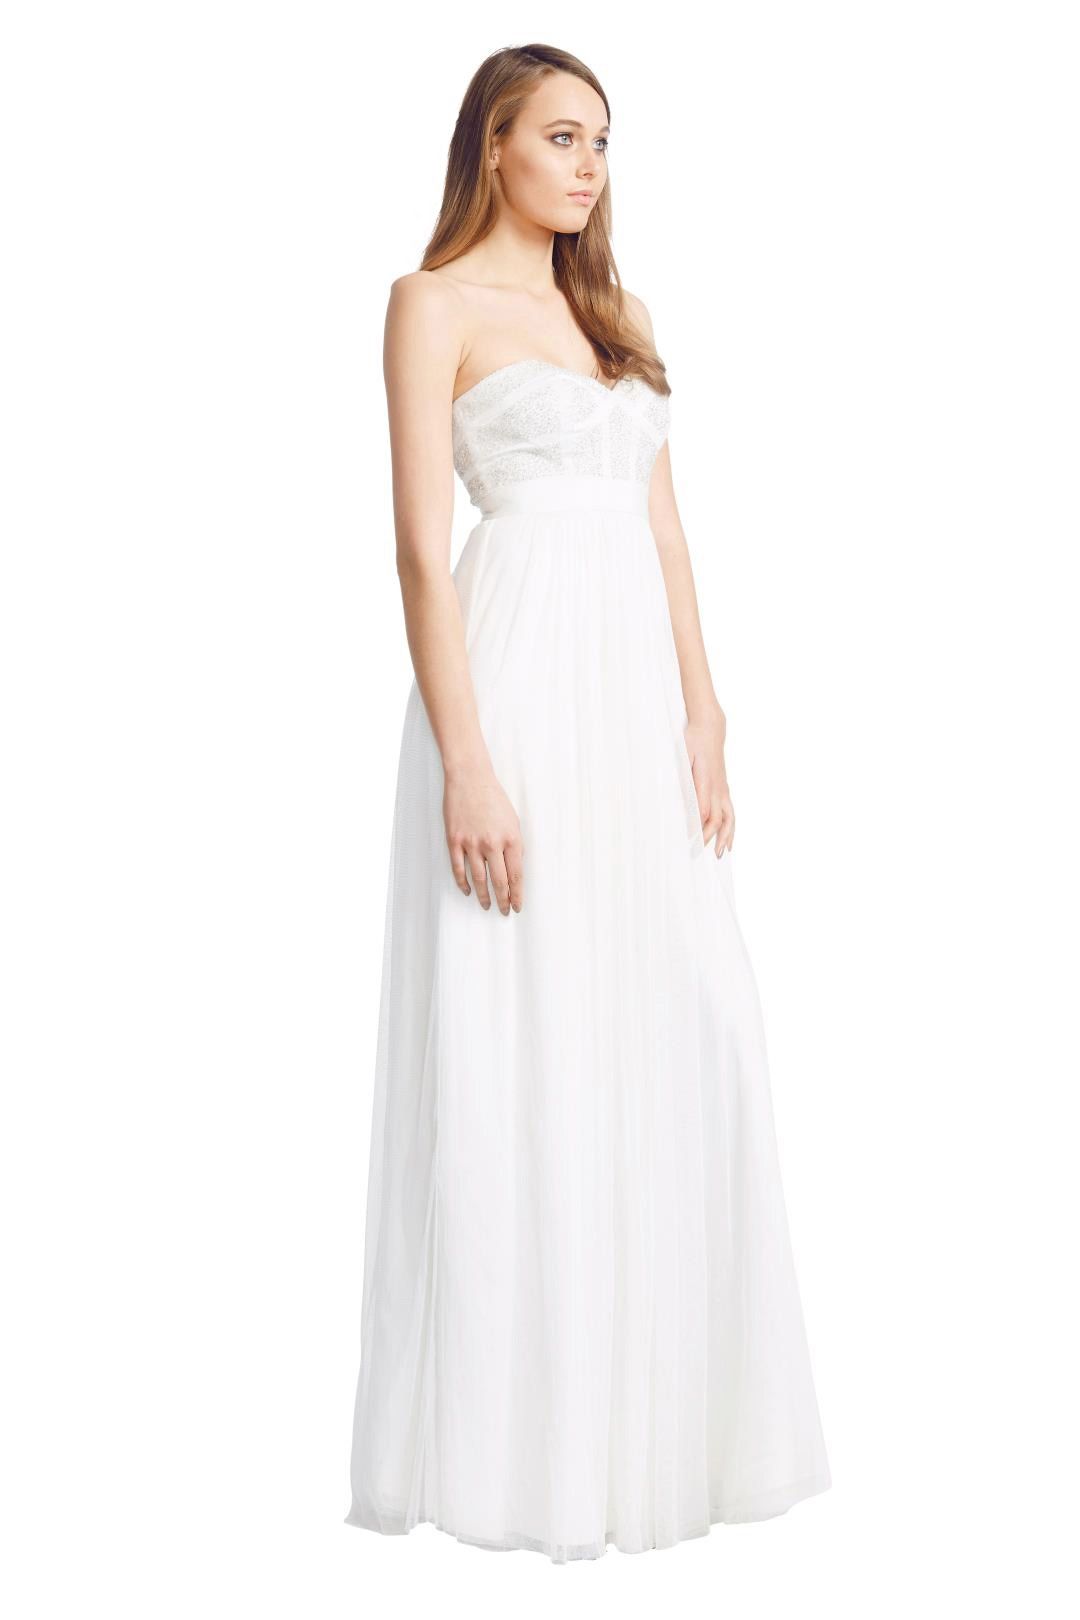 George - Pixel Gown - White - Side